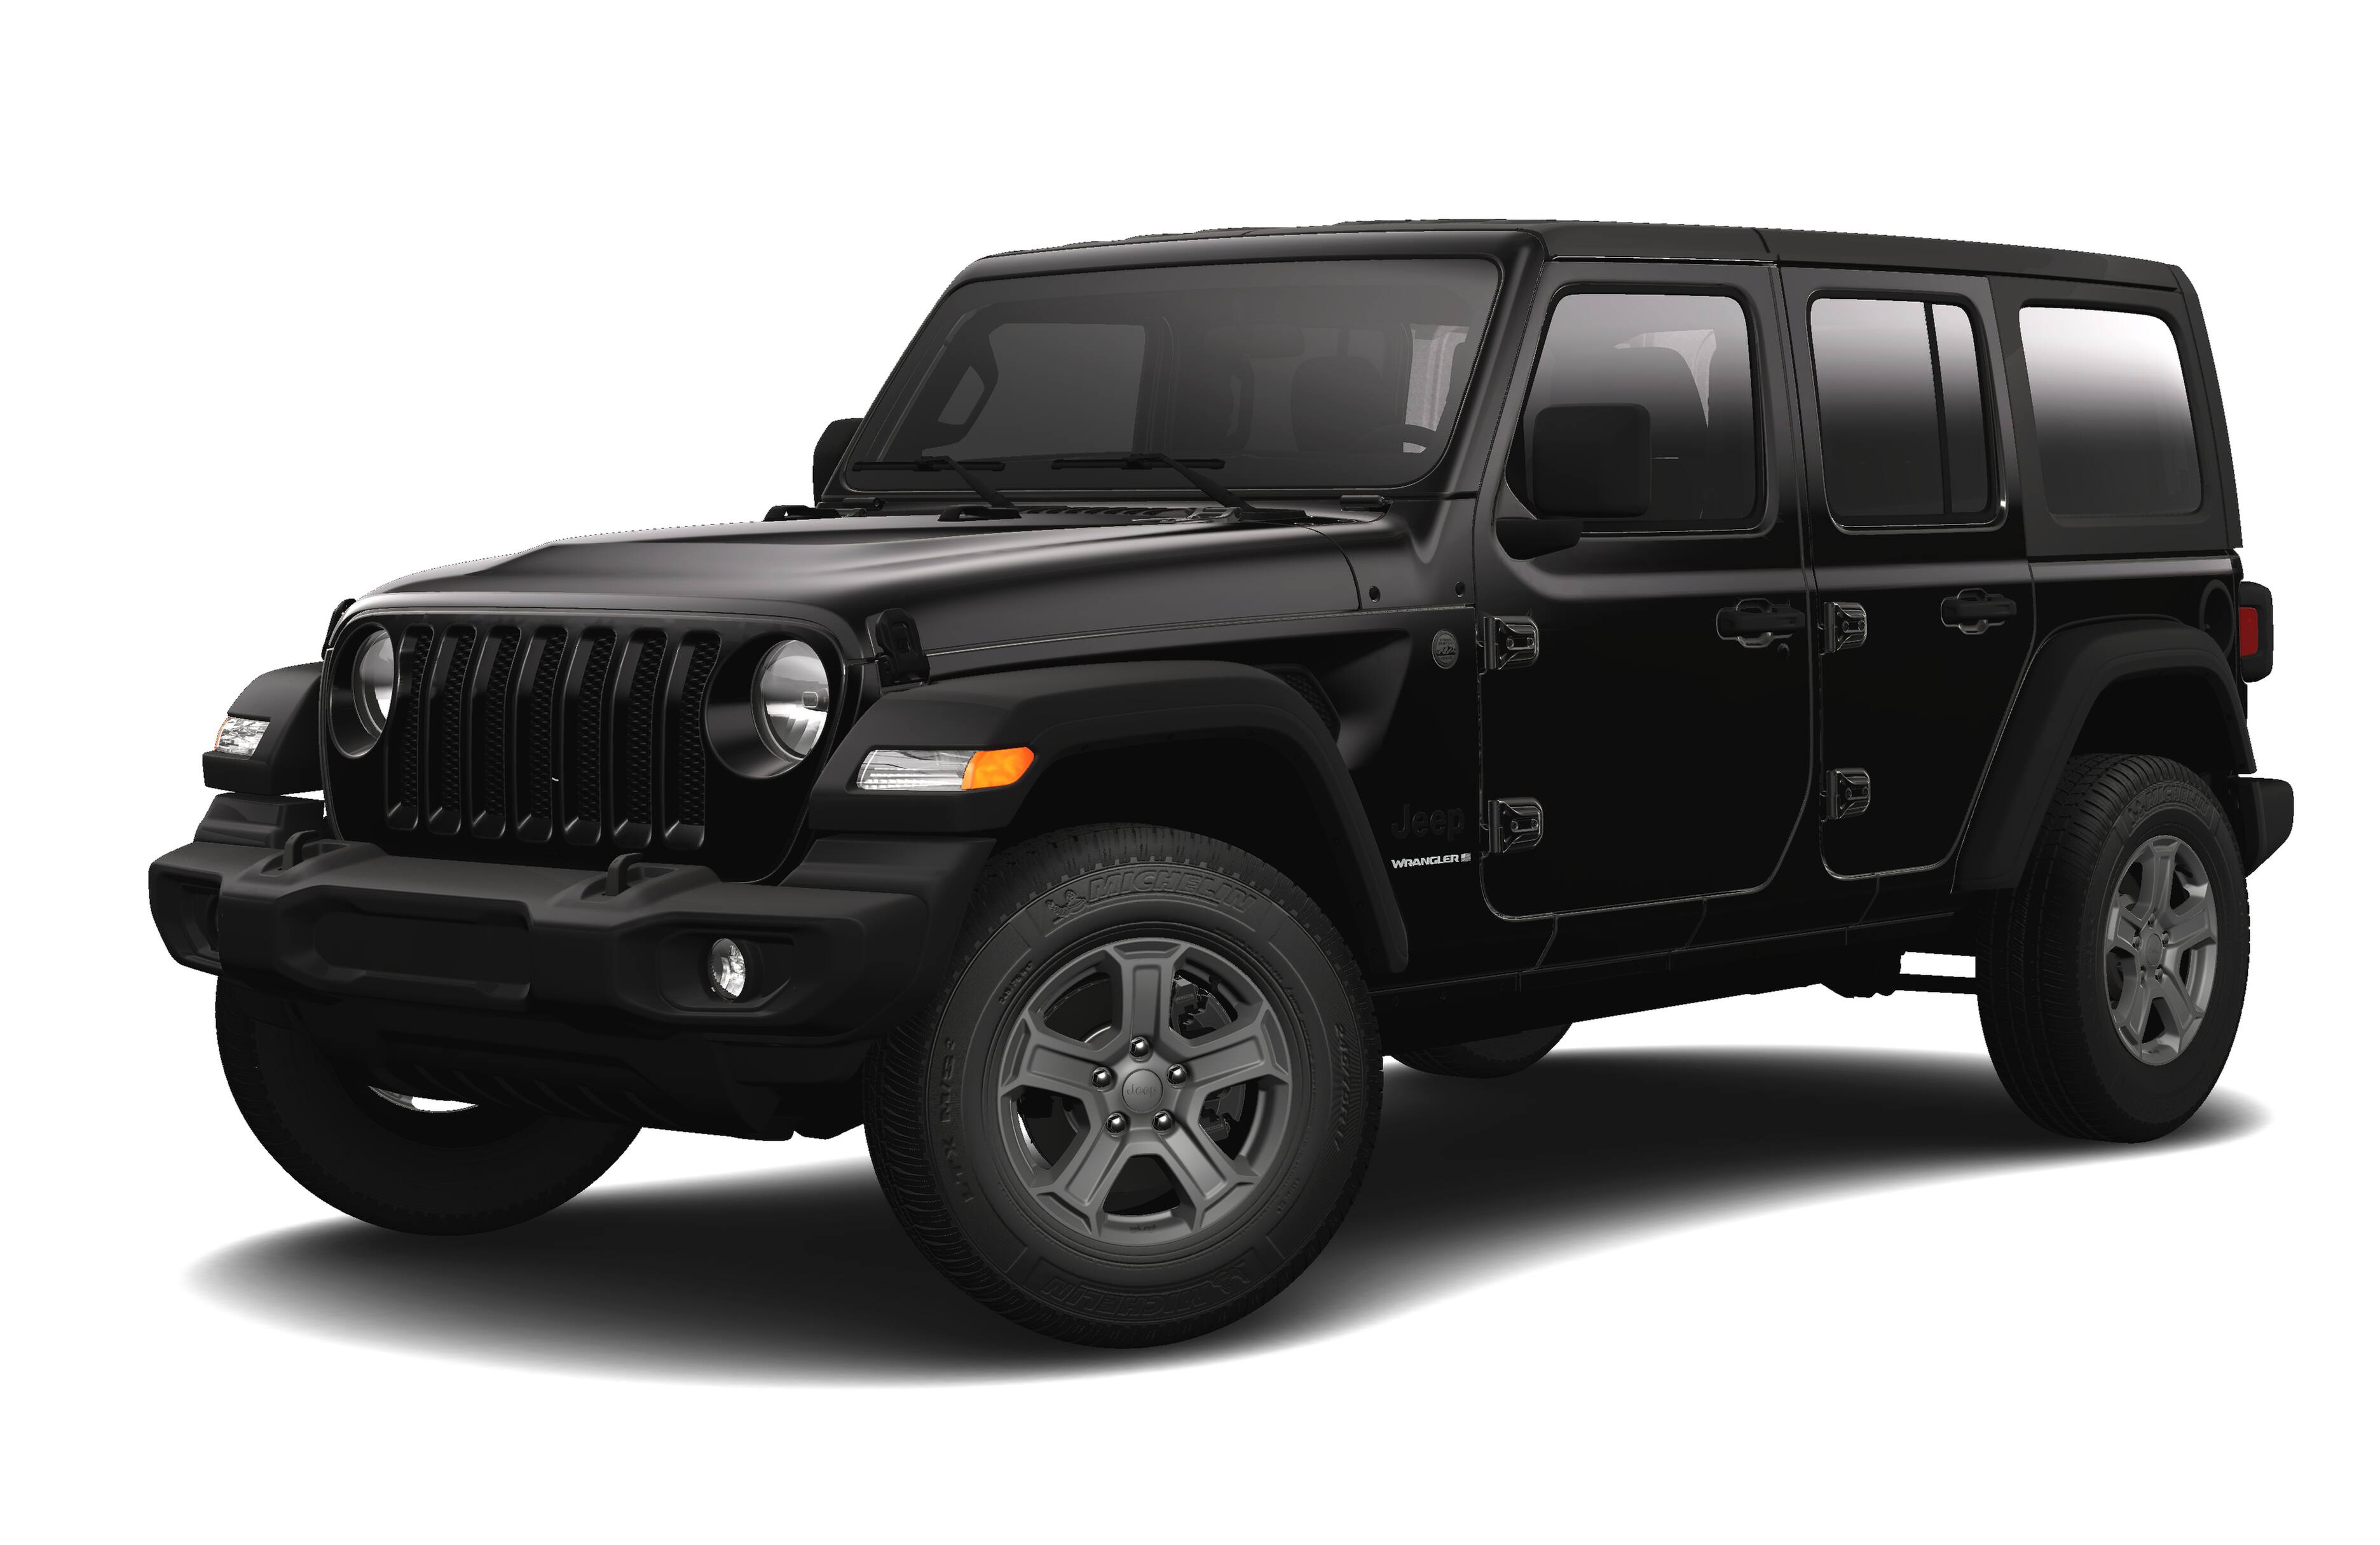 New Jeep Wrangler For Sale in West Covina | Envision CDJR West Covina